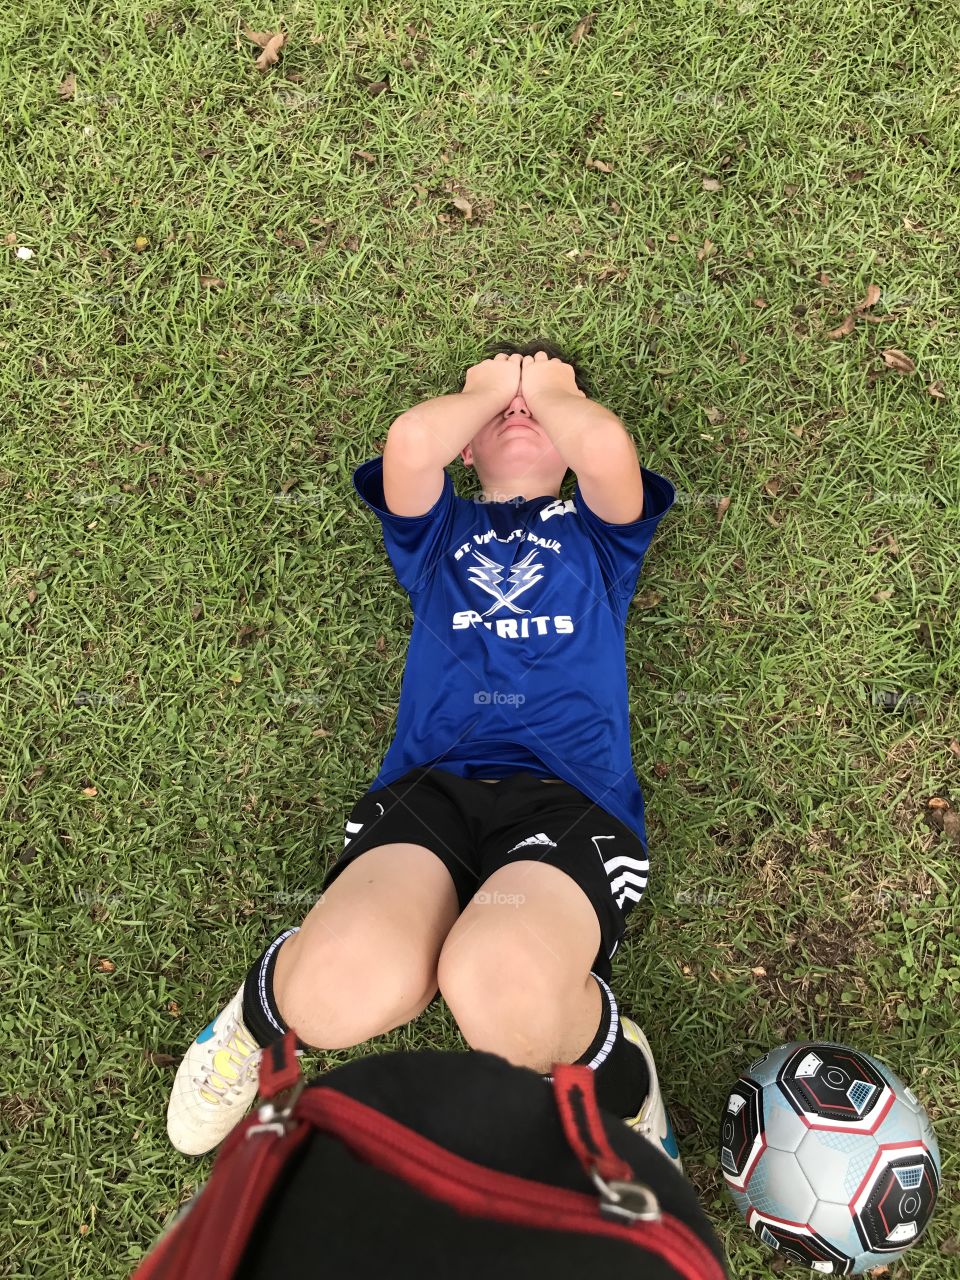 This cute teen boy is whooped after his grueling soccer game on a hot day!